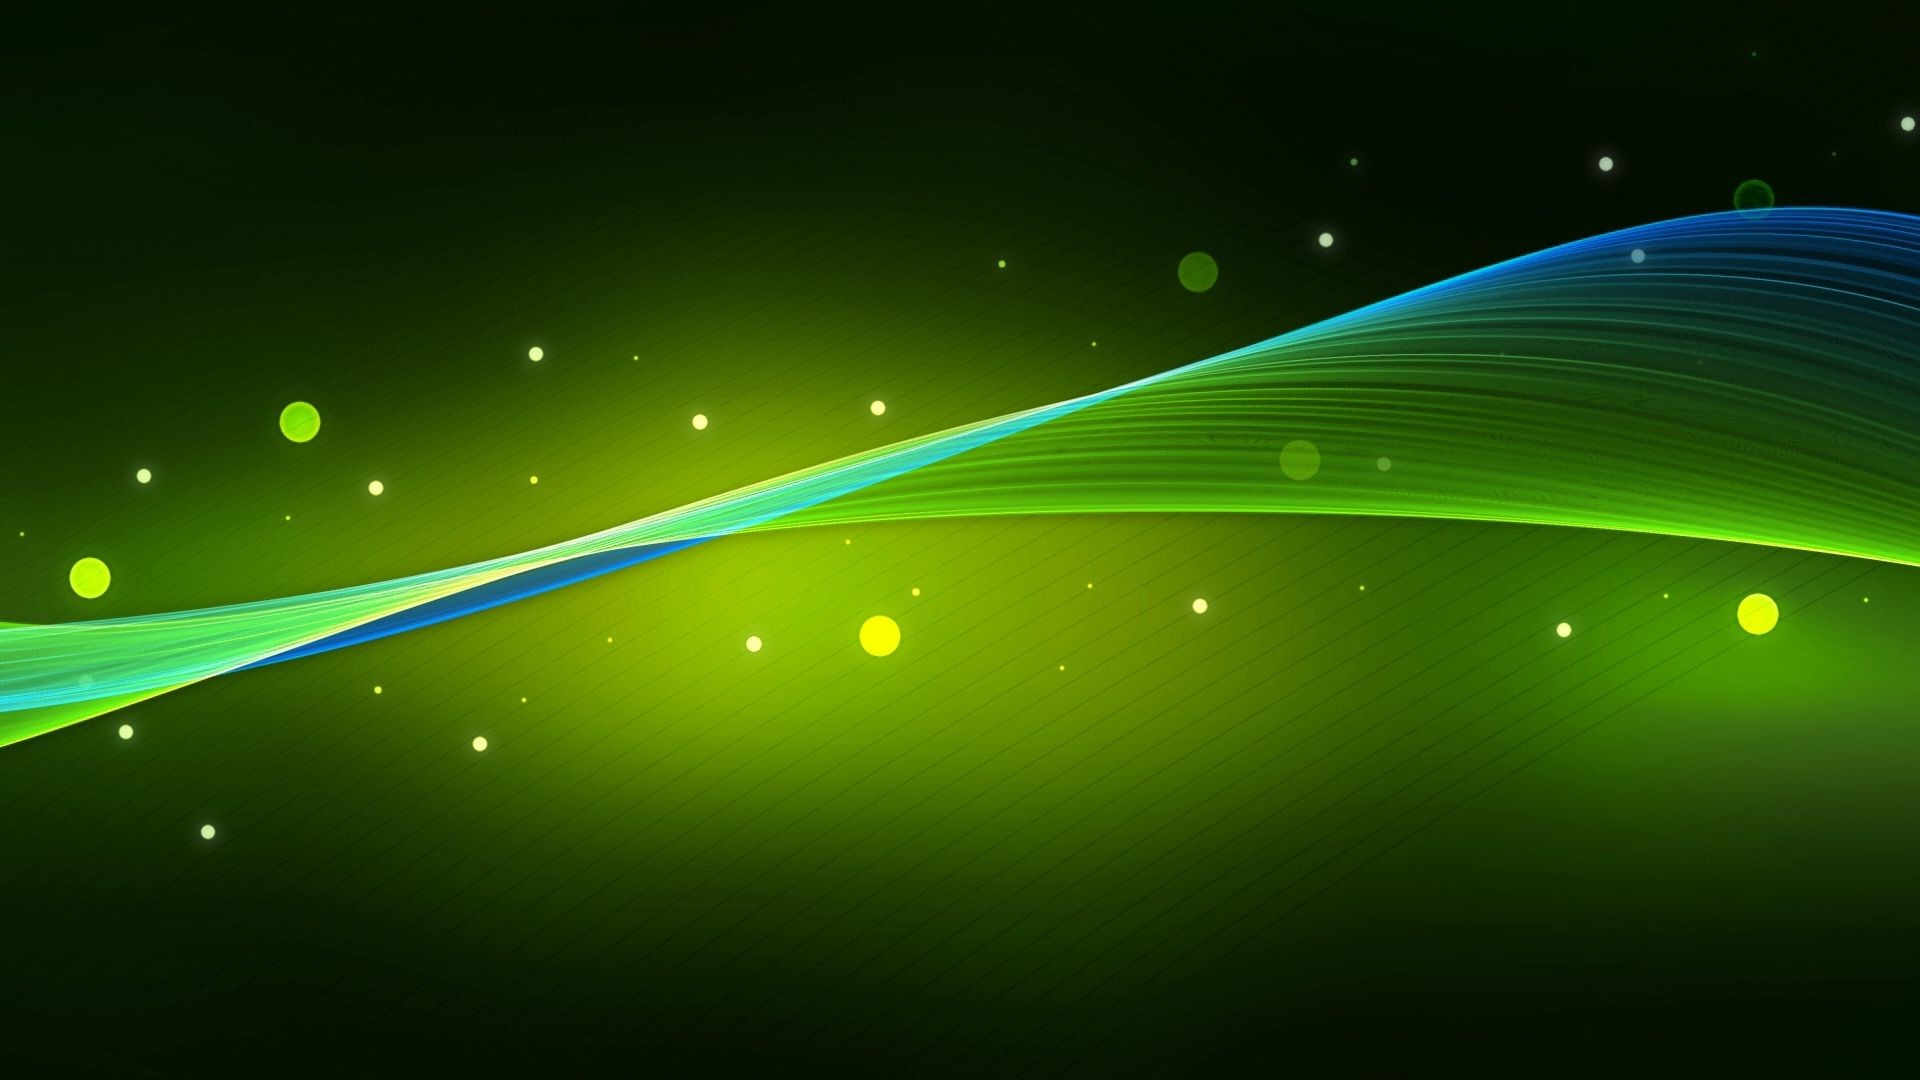 HD Green Wallpaper Background For